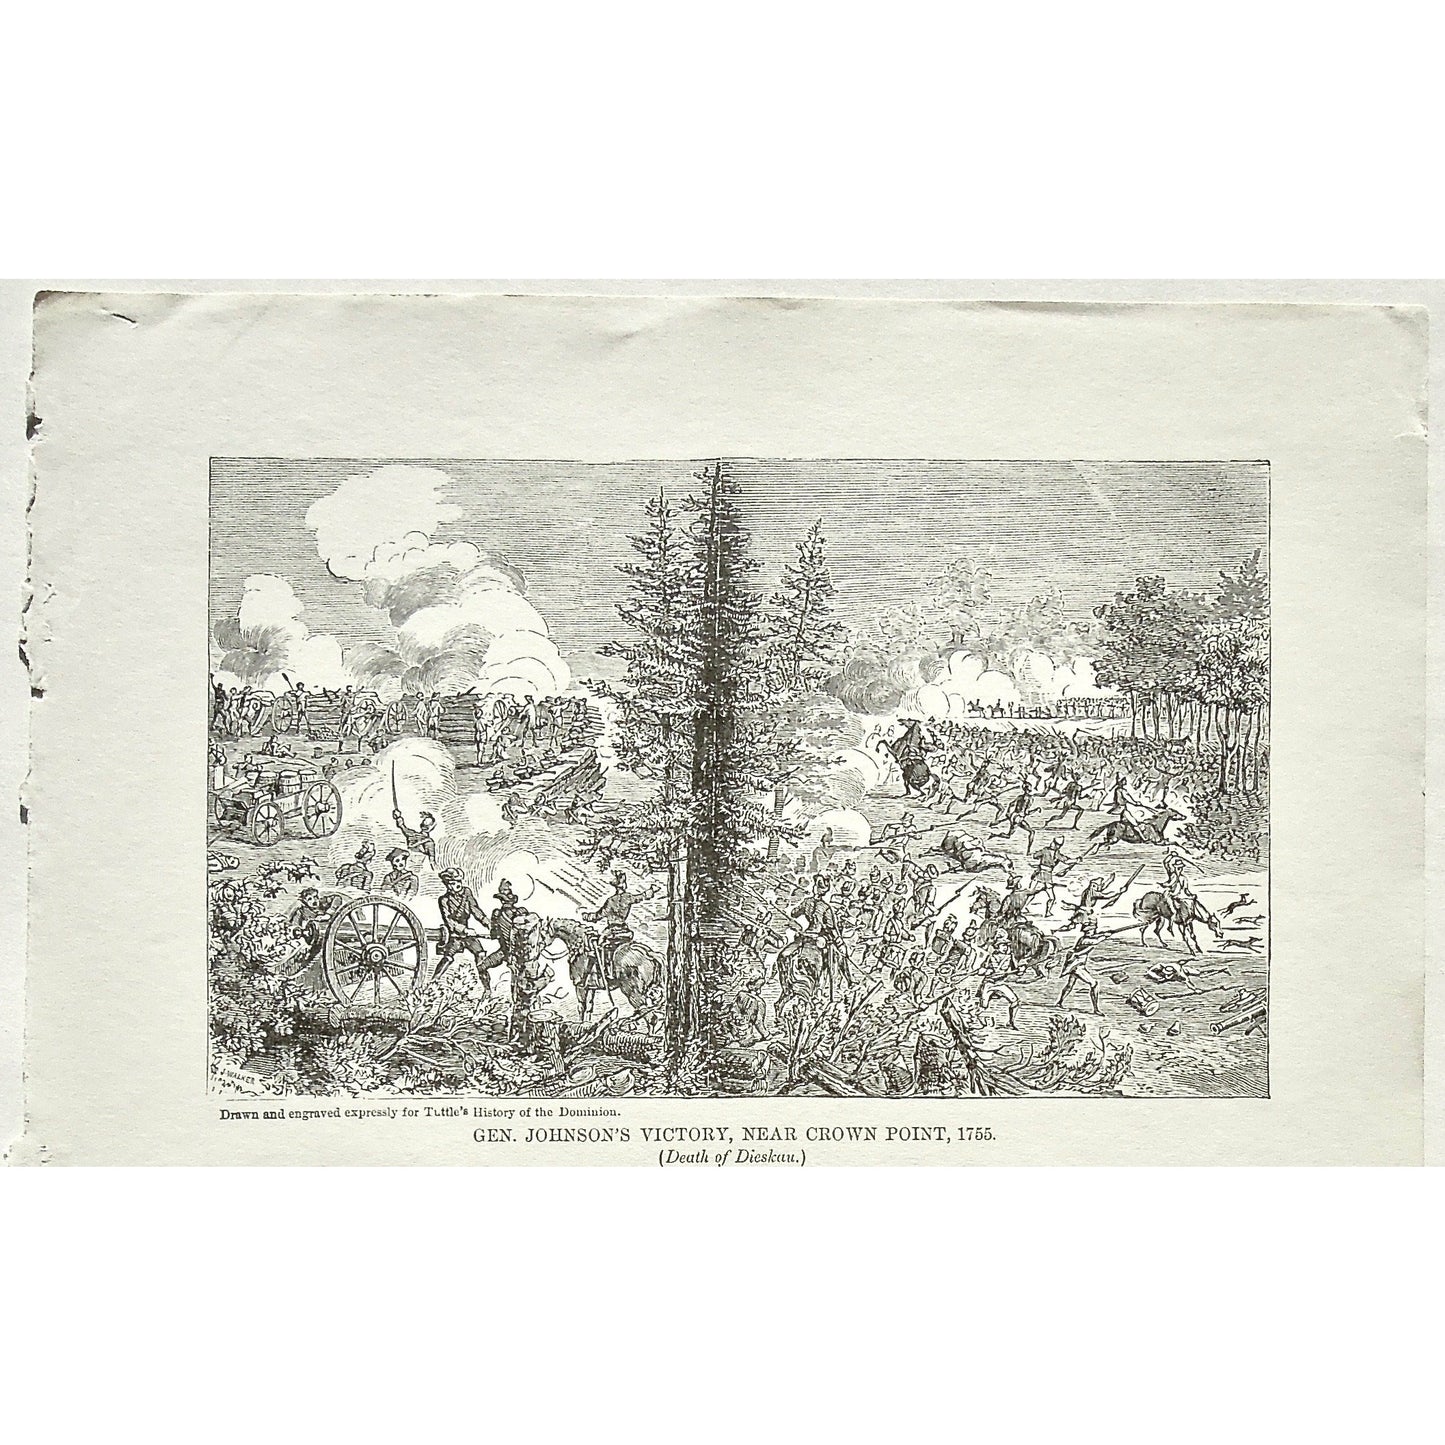 Gen. Johnson's Victory, Near Crown Point, 1755, Death of Dieskau., General Johnson, Death, Dieskau, Battle, Battles, Soldiers, Troops, Cavalry, Weapons, Guns, War, Army, Canons, Swords, Tuttle, Charles Tuttle, History of the Dominion, Popular History of the Dominion, Downie, Bigney, History, Dominion, Canada, Canadian History, Antique, Antique Print, Steel Engraving, Engraving, Prints, Printmaking, Original, Rare prints, rare books, Wall decor, Home decor, office art, Unique, 1877, Old prints, Historical,